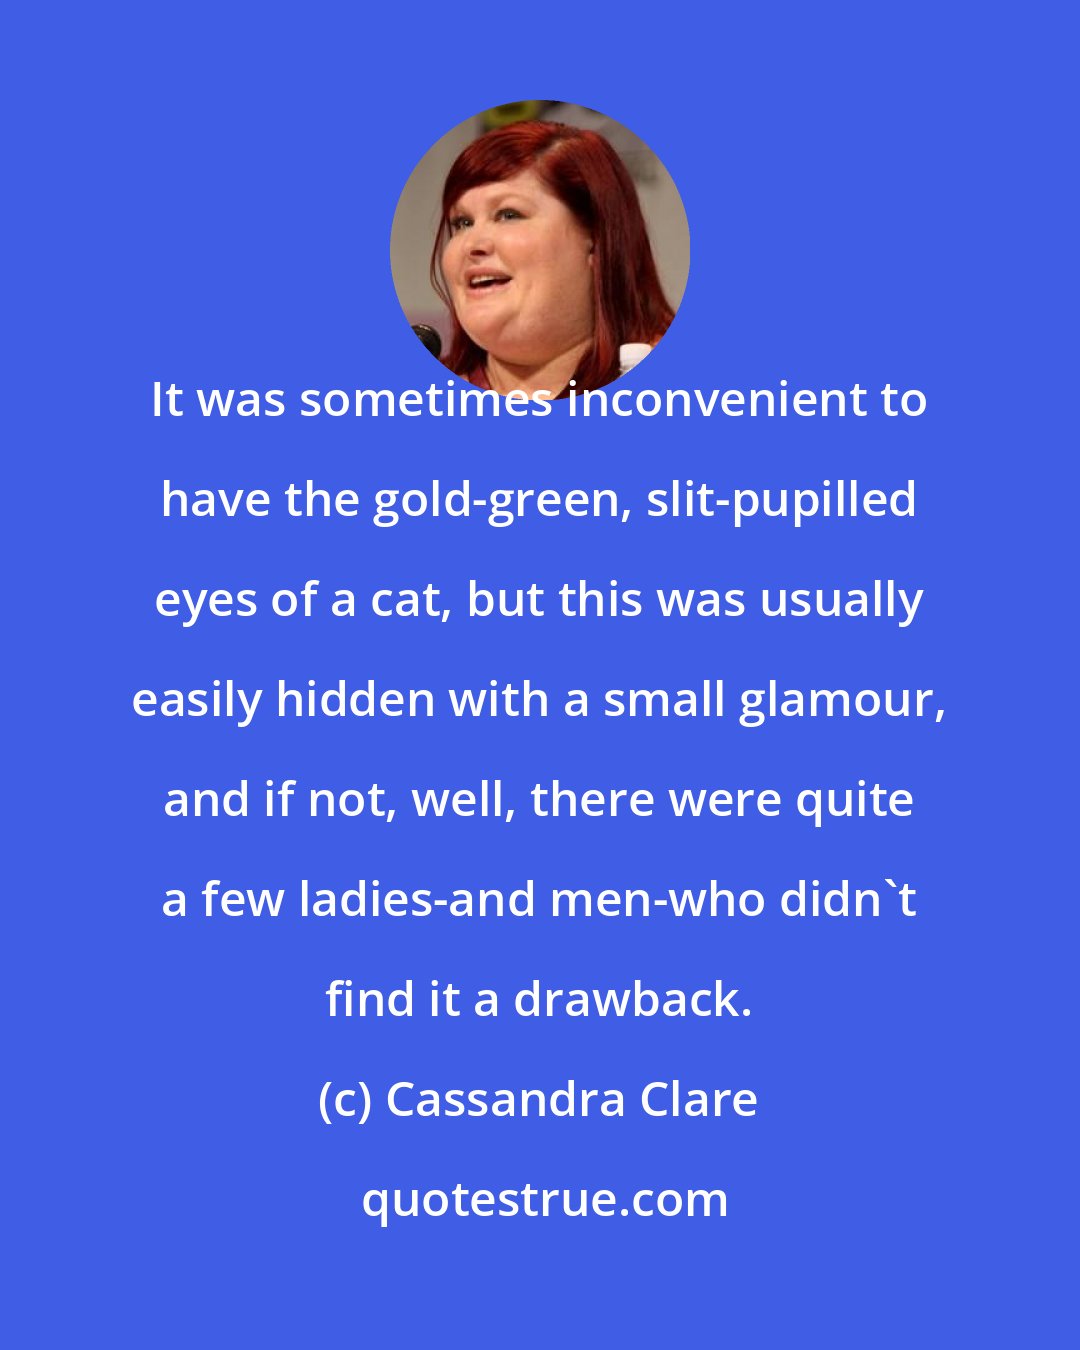 Cassandra Clare: It was sometimes inconvenient to have the gold-green, slit-pupilled eyes of a cat, but this was usually easily hidden with a small glamour, and if not, well, there were quite a few ladies-and men-who didn't find it a drawback.